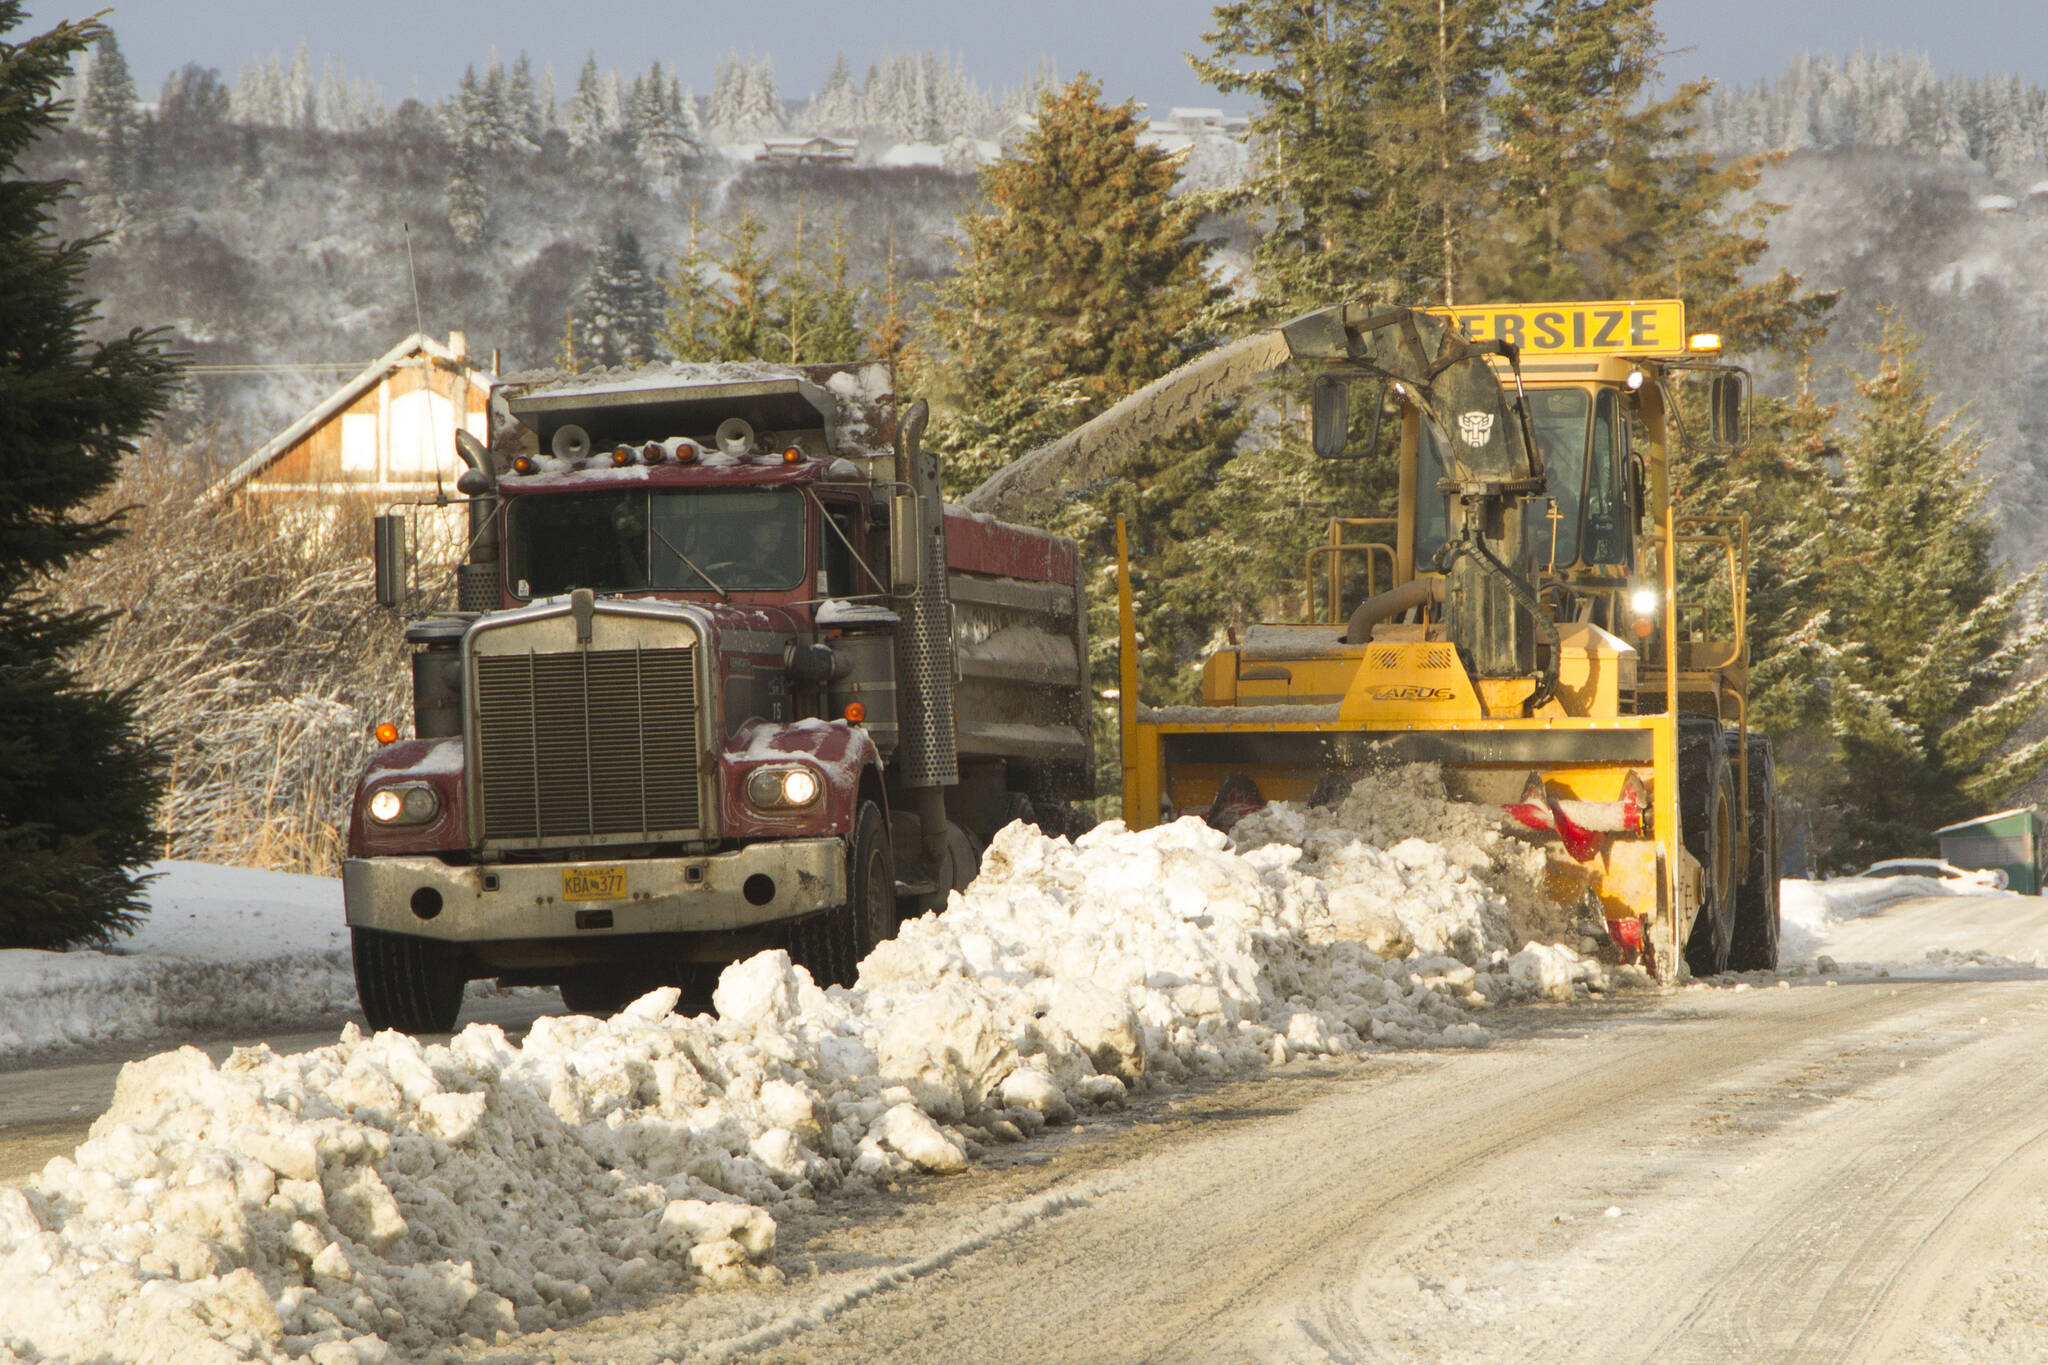 Snow on Heath Street is blown into a truck, which will later be dumped near Public Works, on Dec. 7, 2021, in Homer, Alaska. (Photo by Sarah Knapp/Homer News)